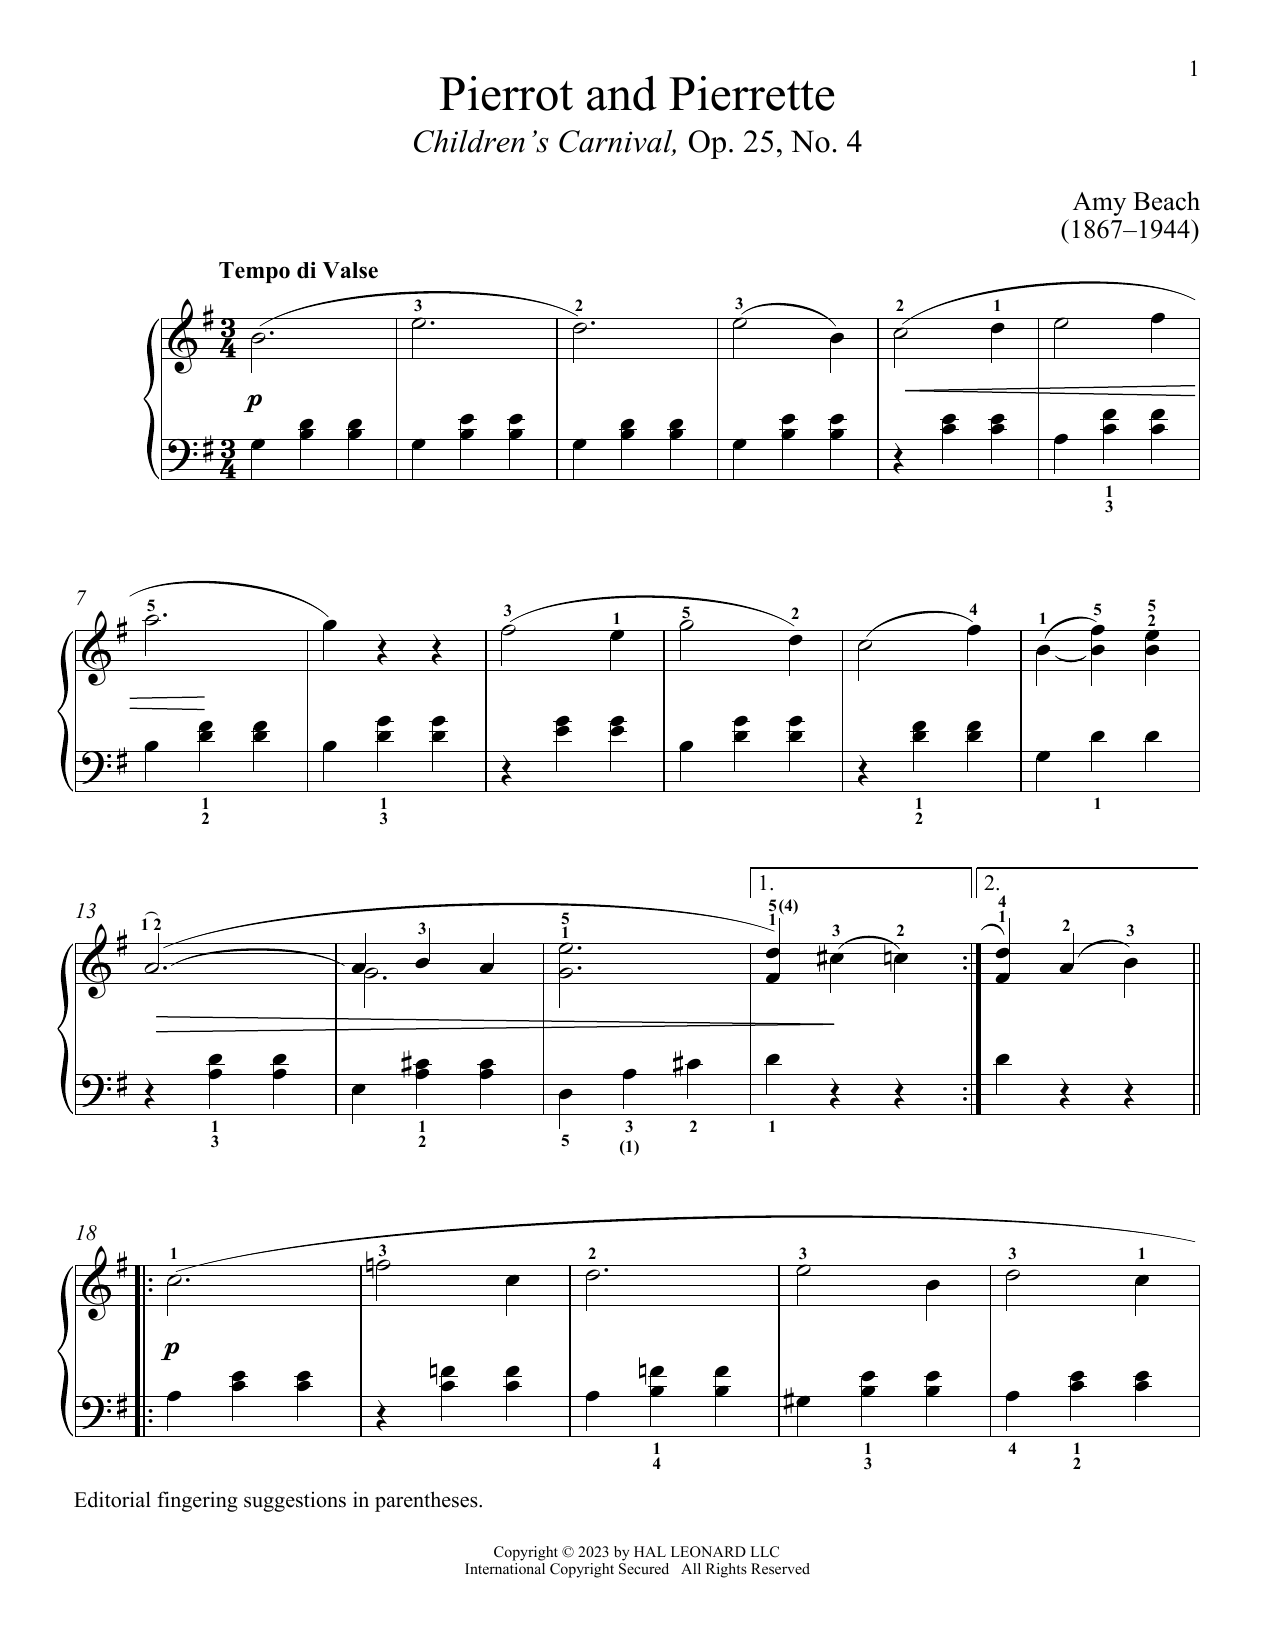 Download Amy Marcy Beach Pierrot and Pierrette Sheet Music